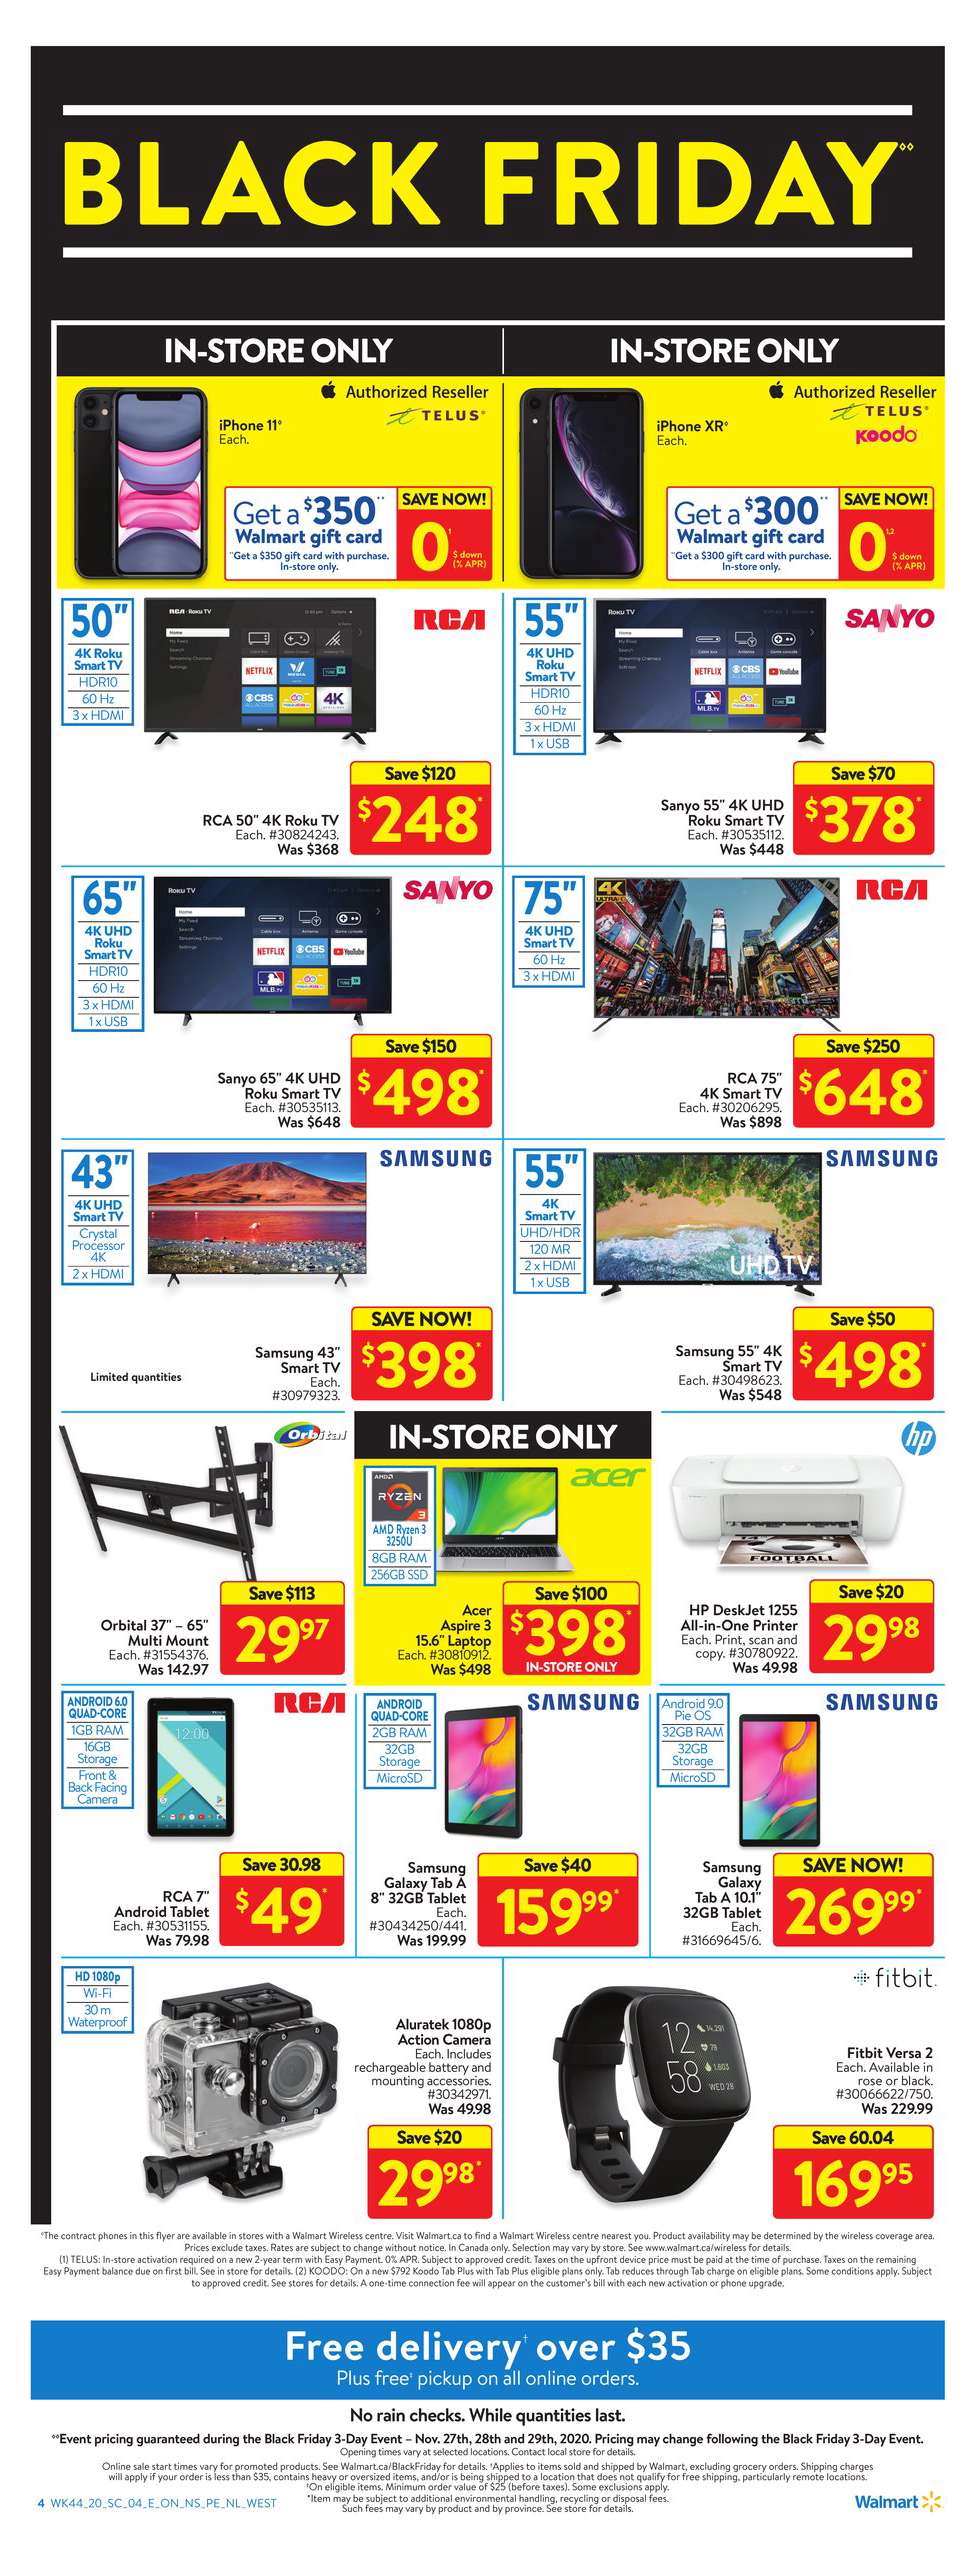 Walmart Black Friday Flyer Deals 2021 Canada - What Are The Real Black Friday Deals